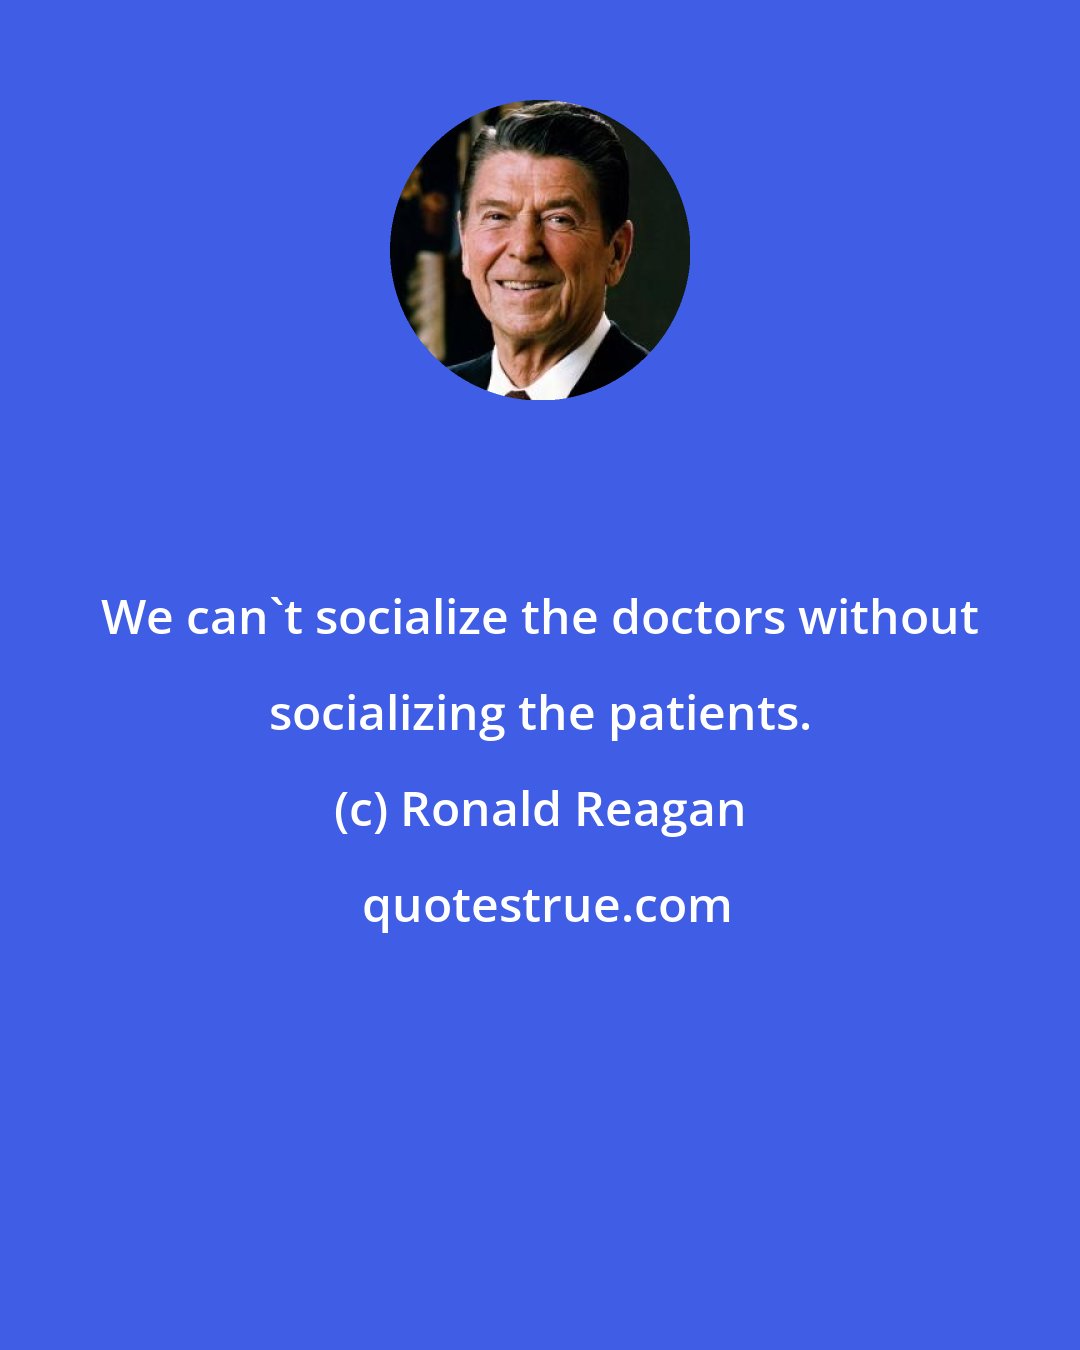 Ronald Reagan: We can't socialize the doctors without socializing the patients.